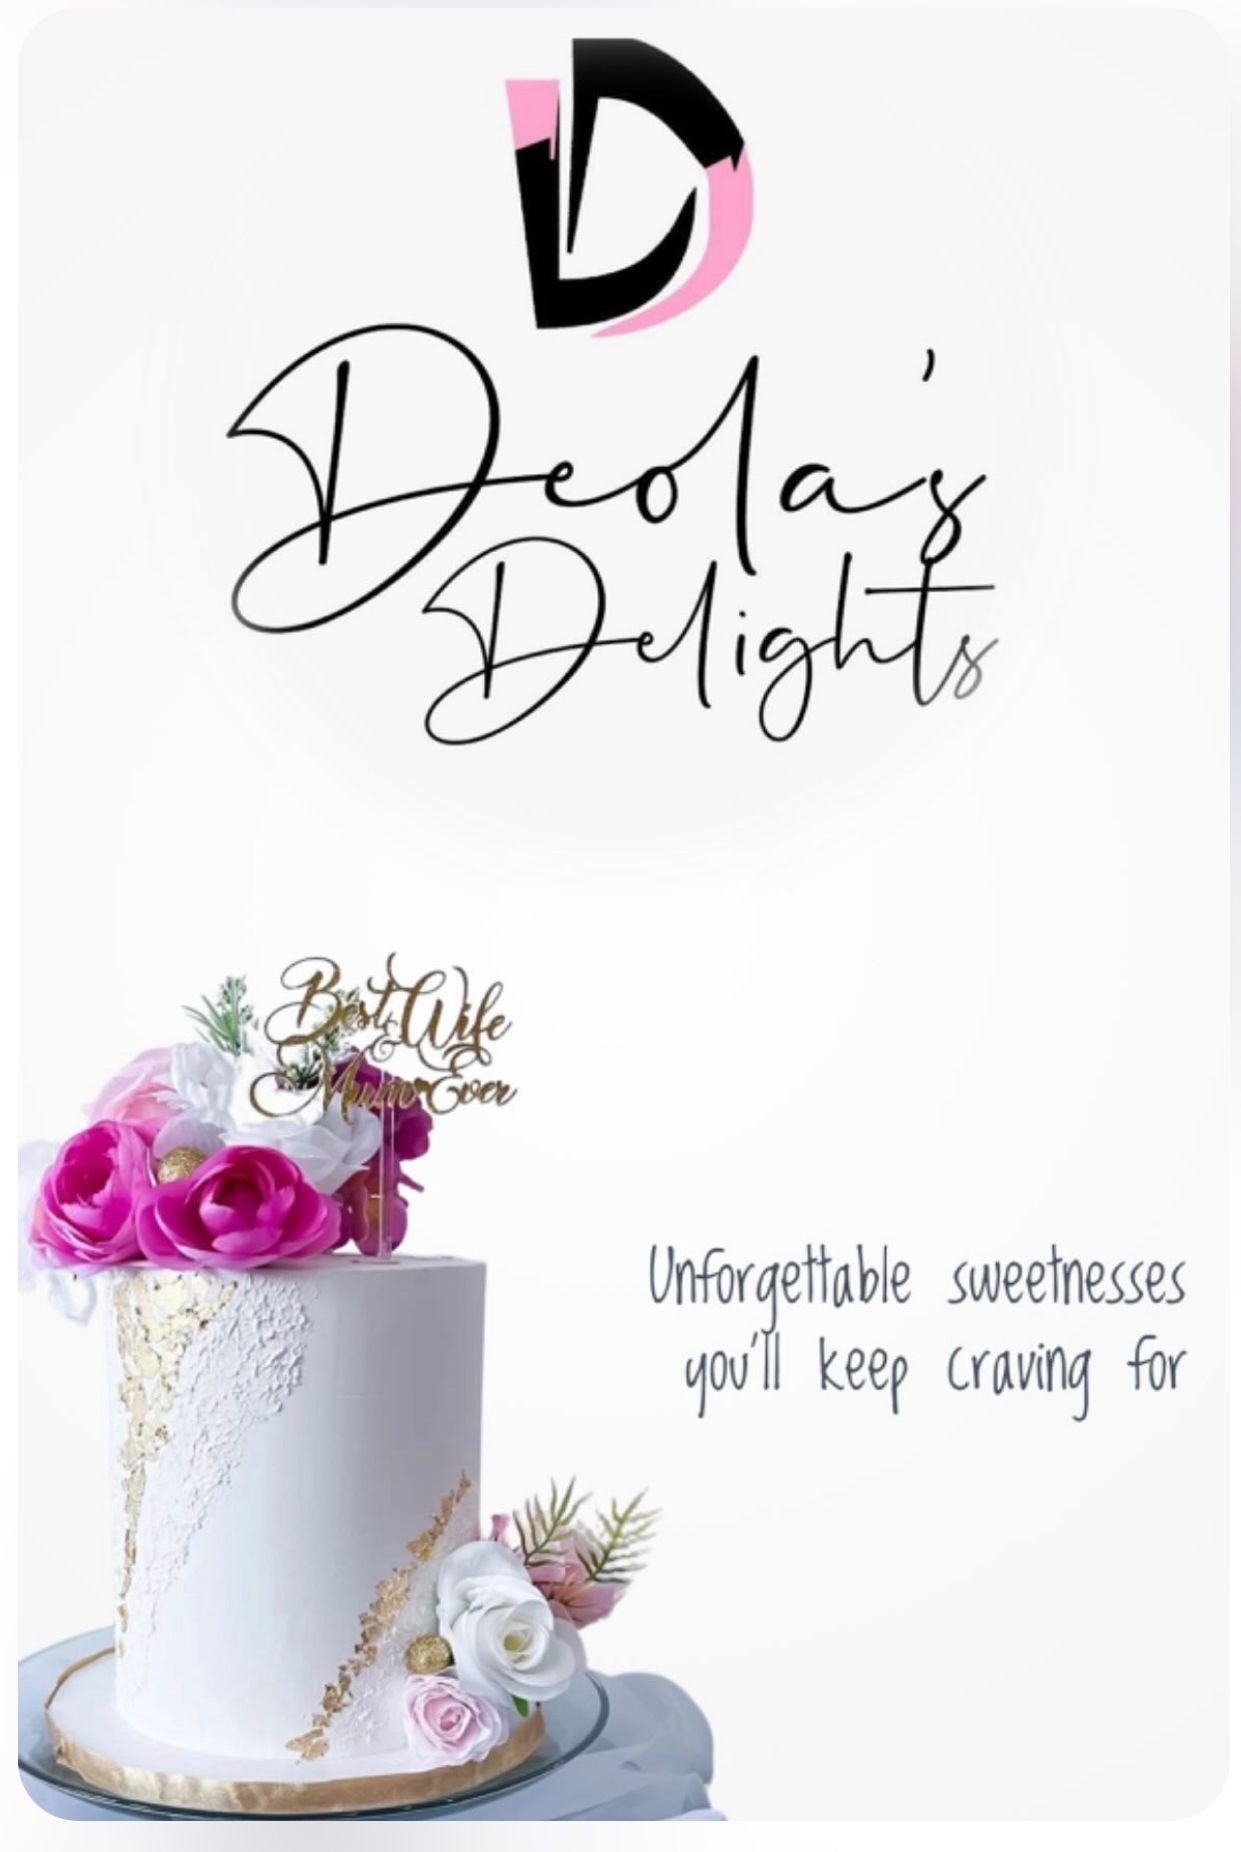 Deola’s Delights